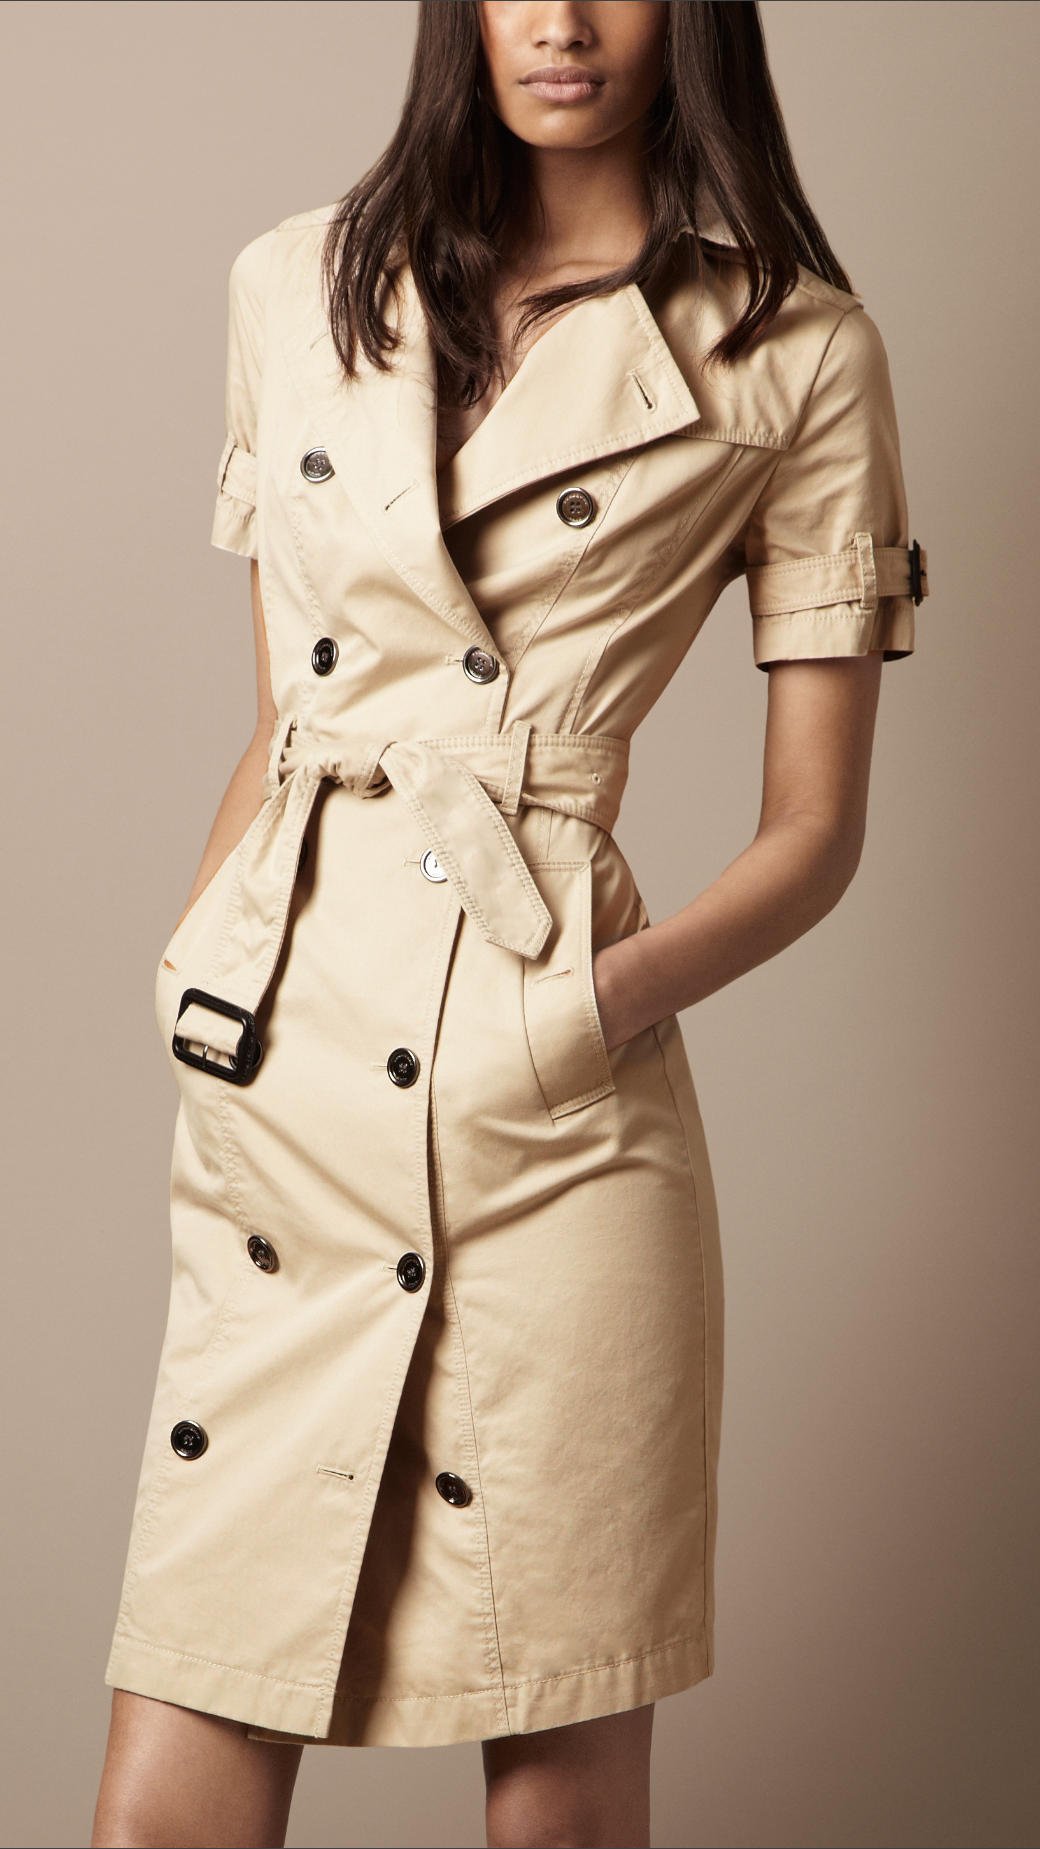 Burberry Trench Dress Britain, SAVE 50% 